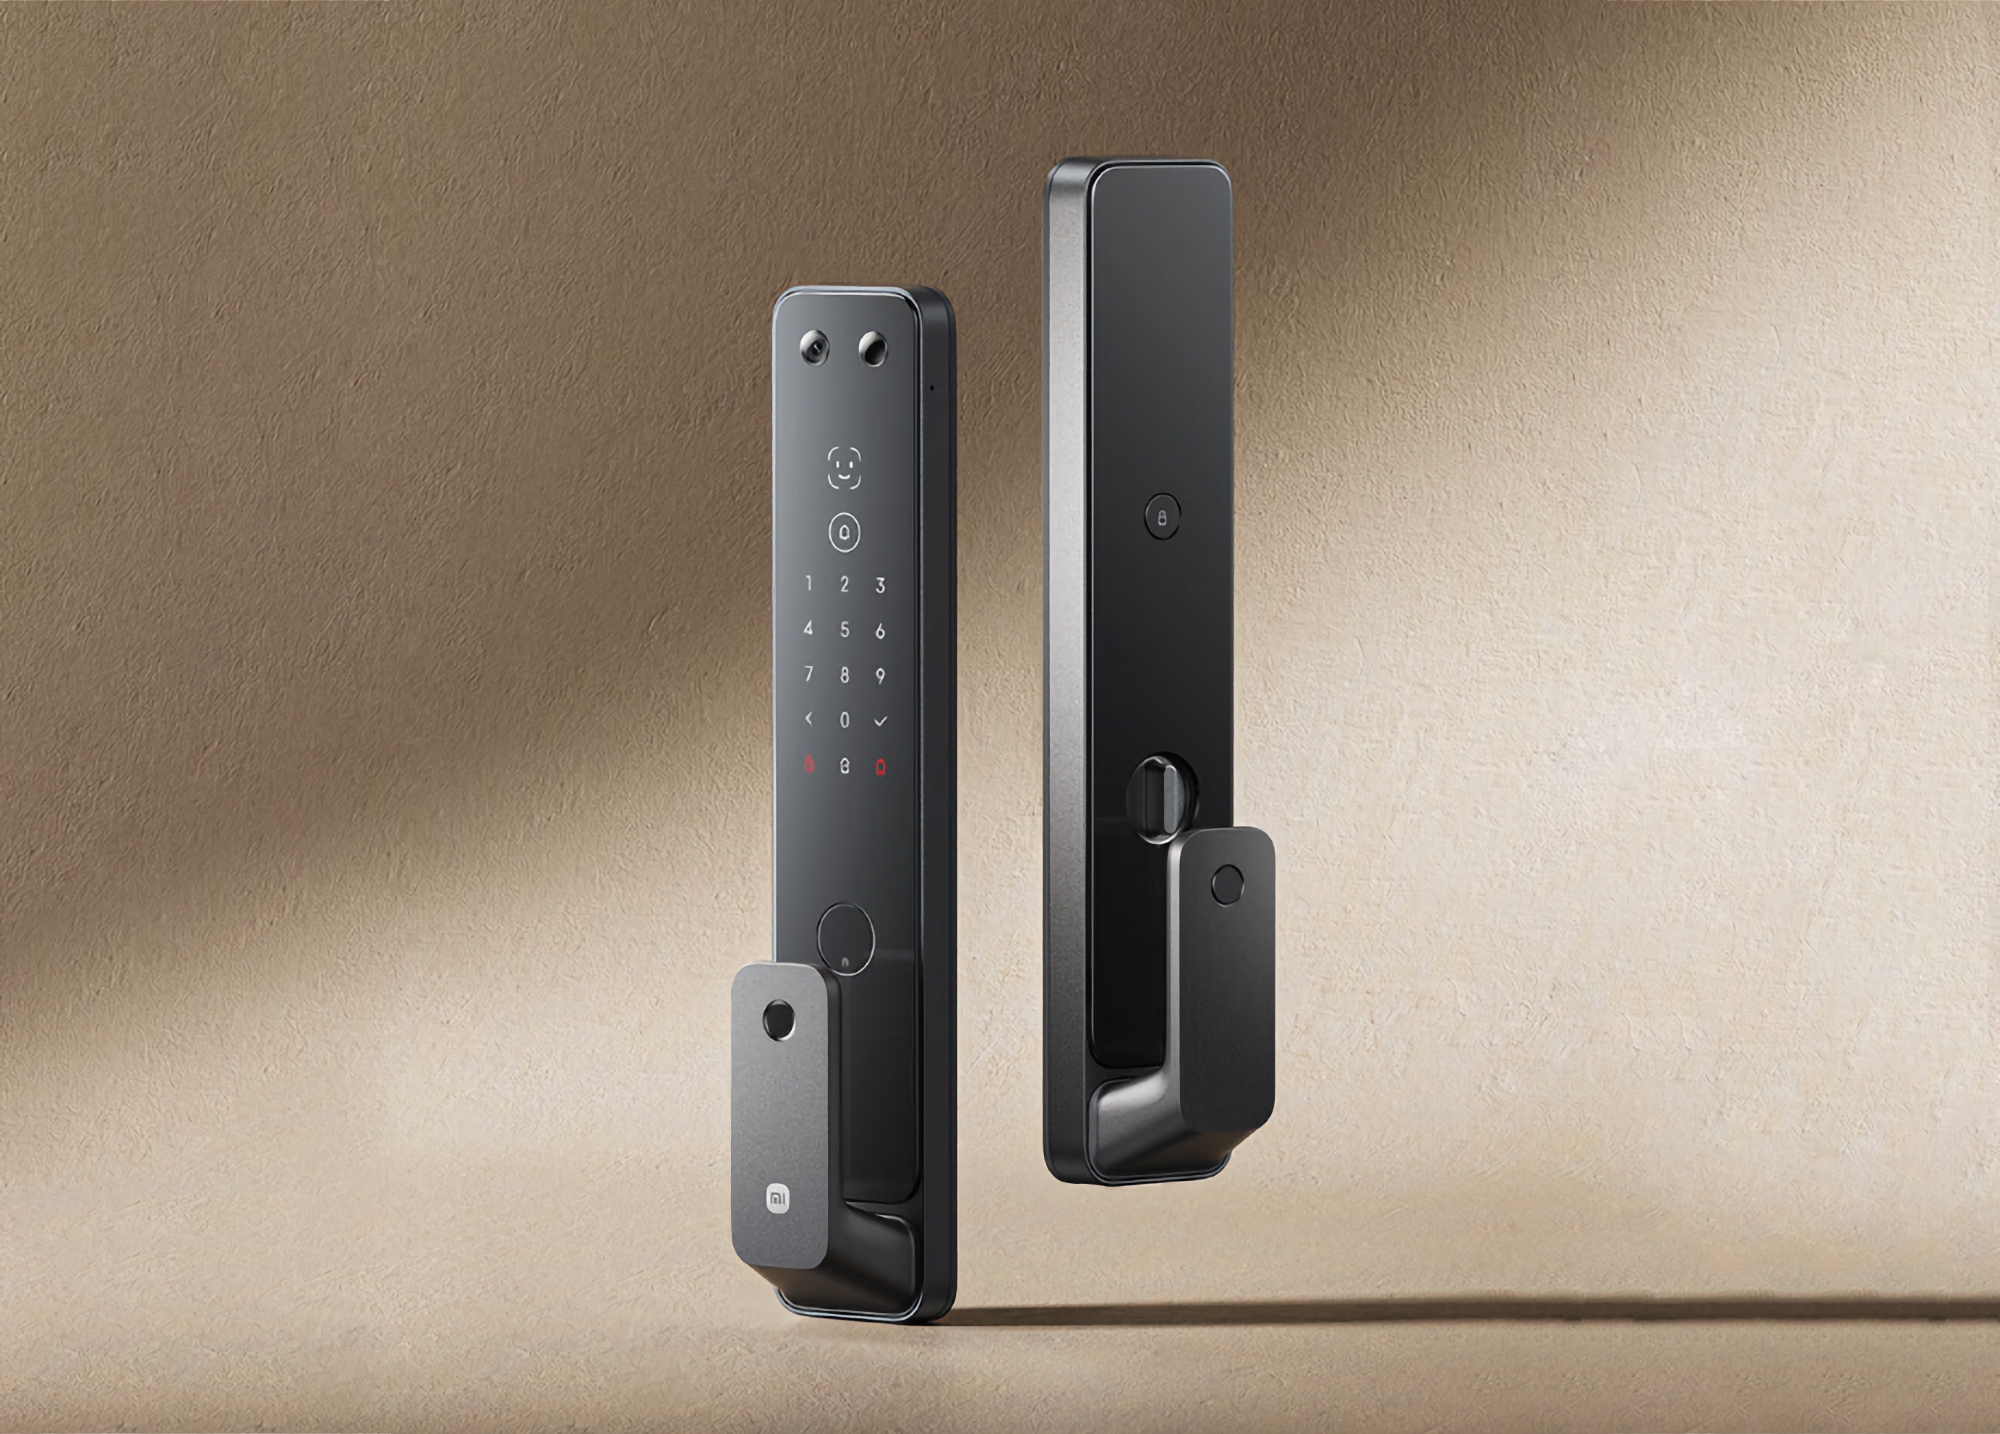 Xiaomi unveiled Smart Door Lock 2 with HyperOS on board and 3D facial recognition feature